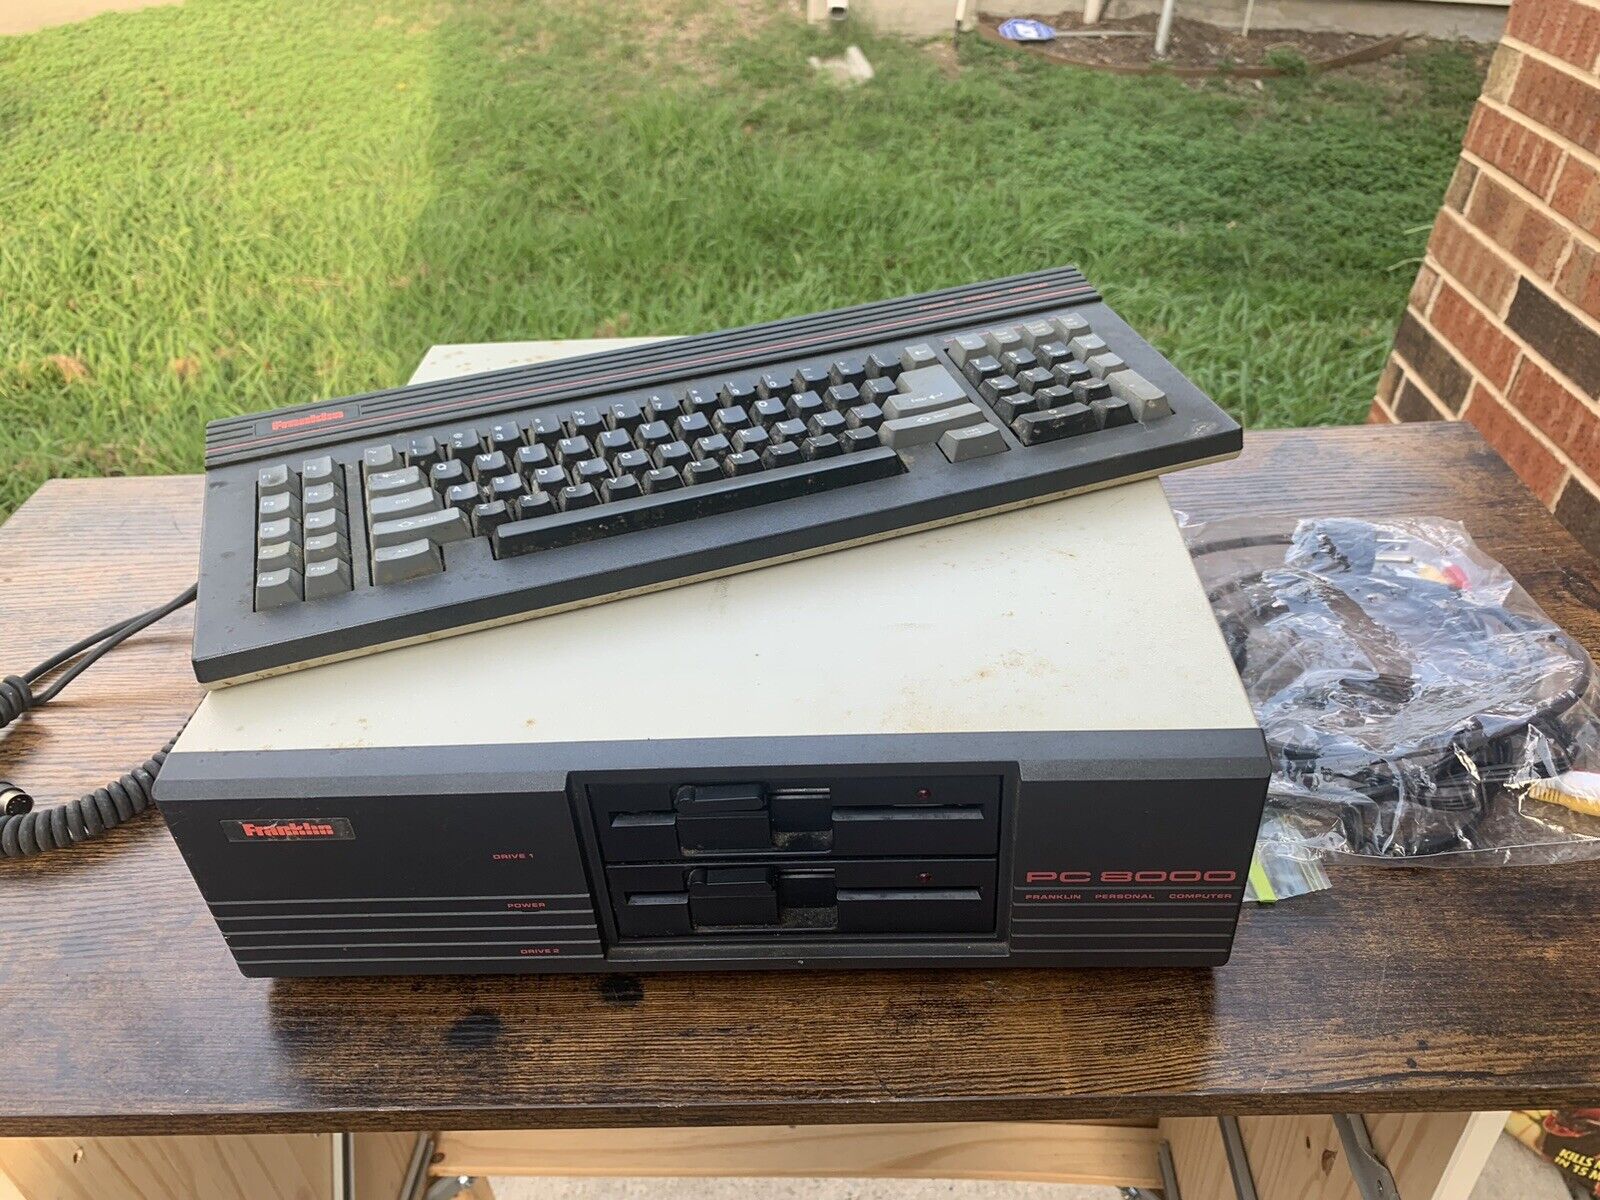 Vintage Franklin PC-8000 Computer with Franklin Keyboard | Tested Powers On